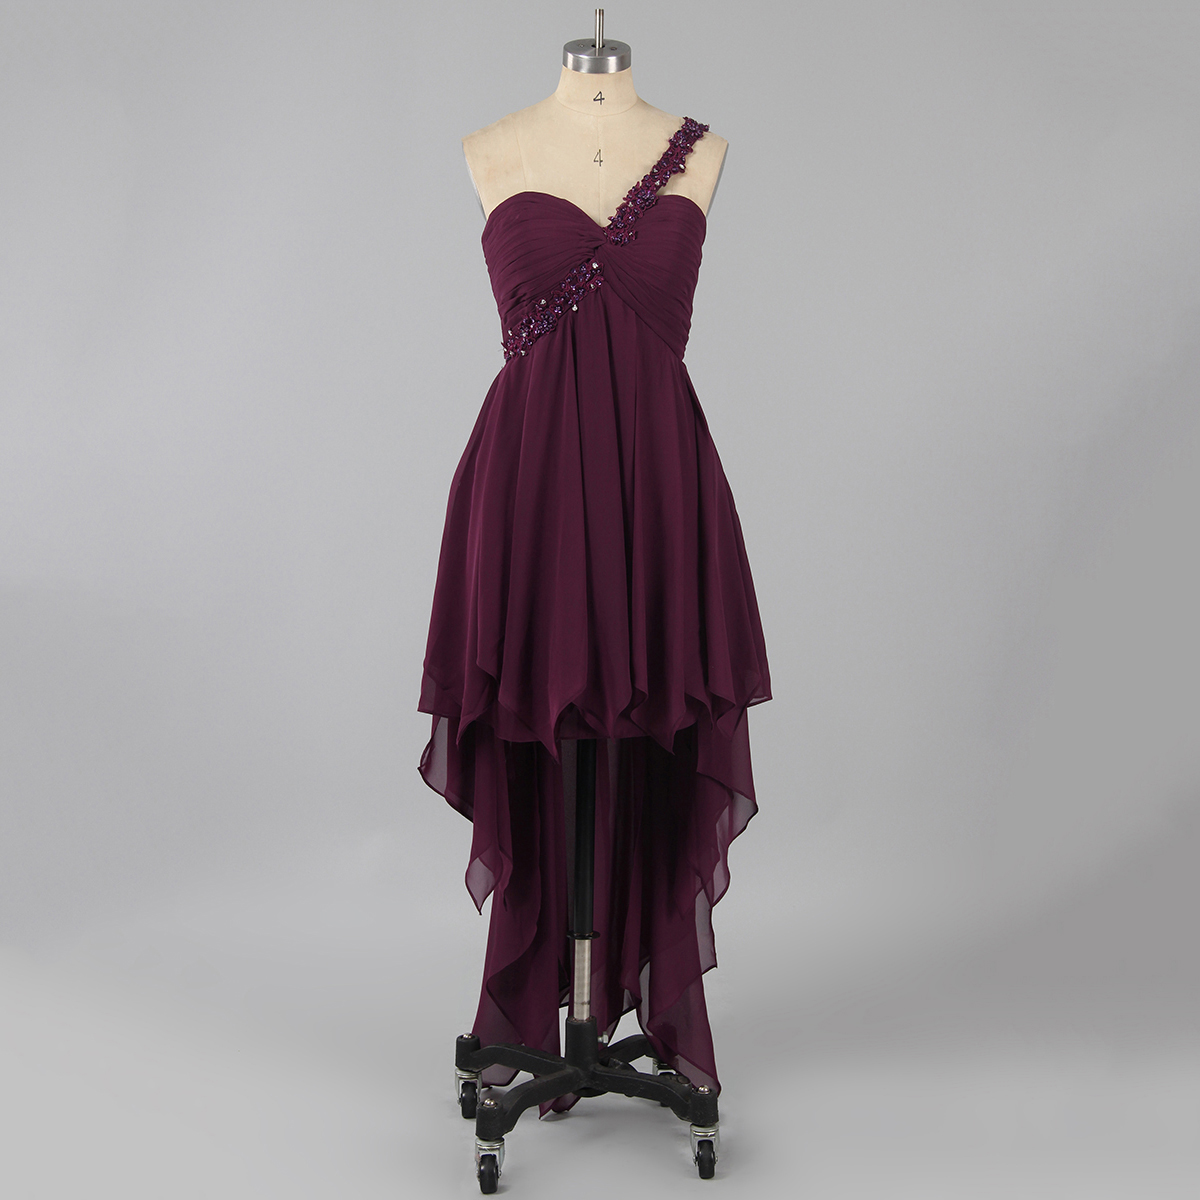 Asymmetric High Low Plum Homecoming Dress With Pleats, Chiffon Homecoming Dress With One Beaded Strap, Sexy Homecoming Dress With Open Back